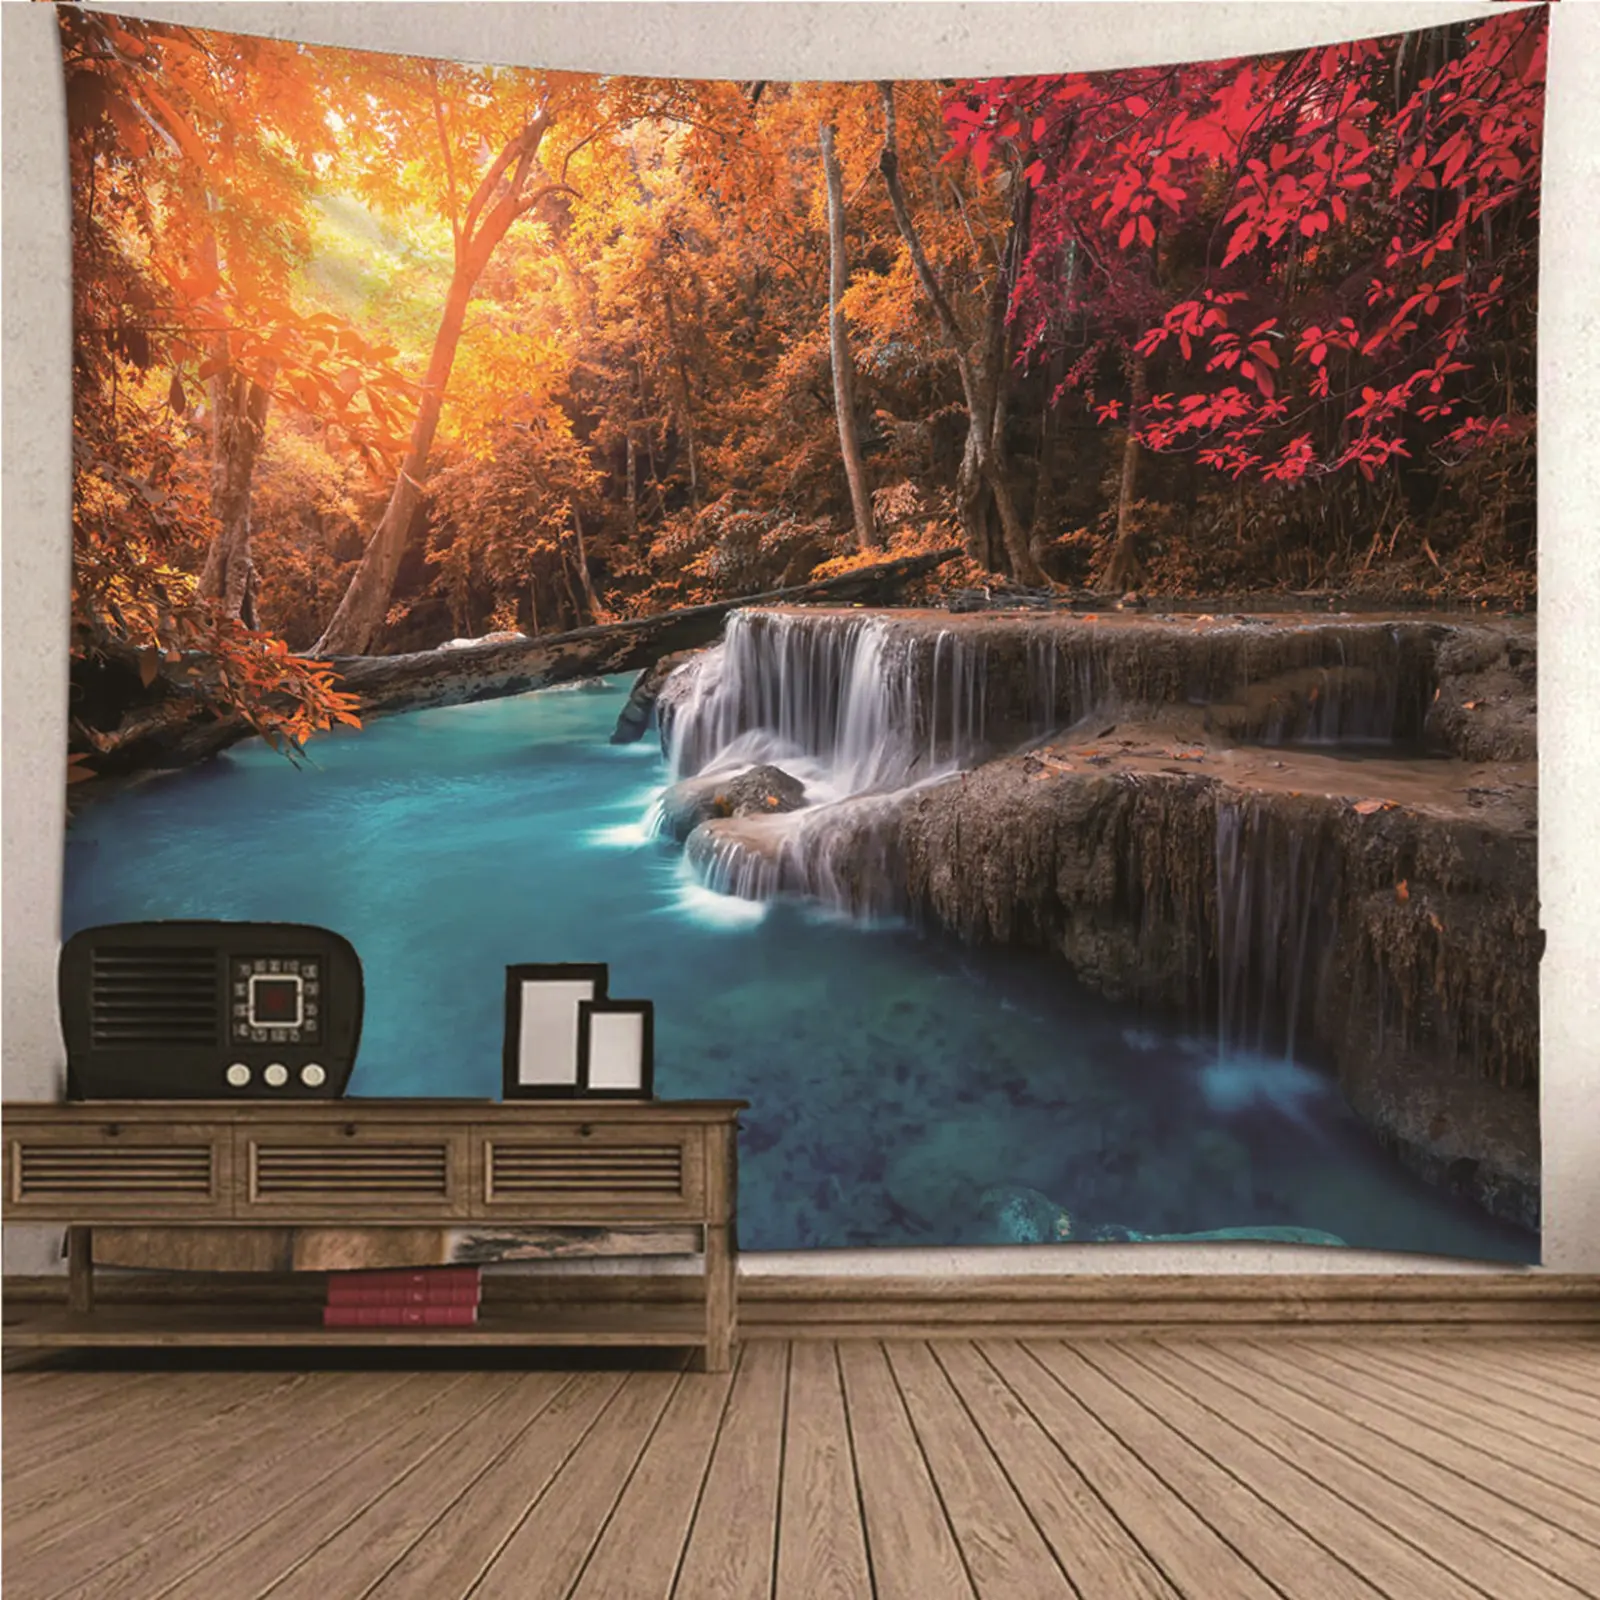 

Home Decor Modern Large Tapestry Wall Hanging natural scenery Maple Forest Waterfall Wall Hanging Blanket Dorm Art Decor